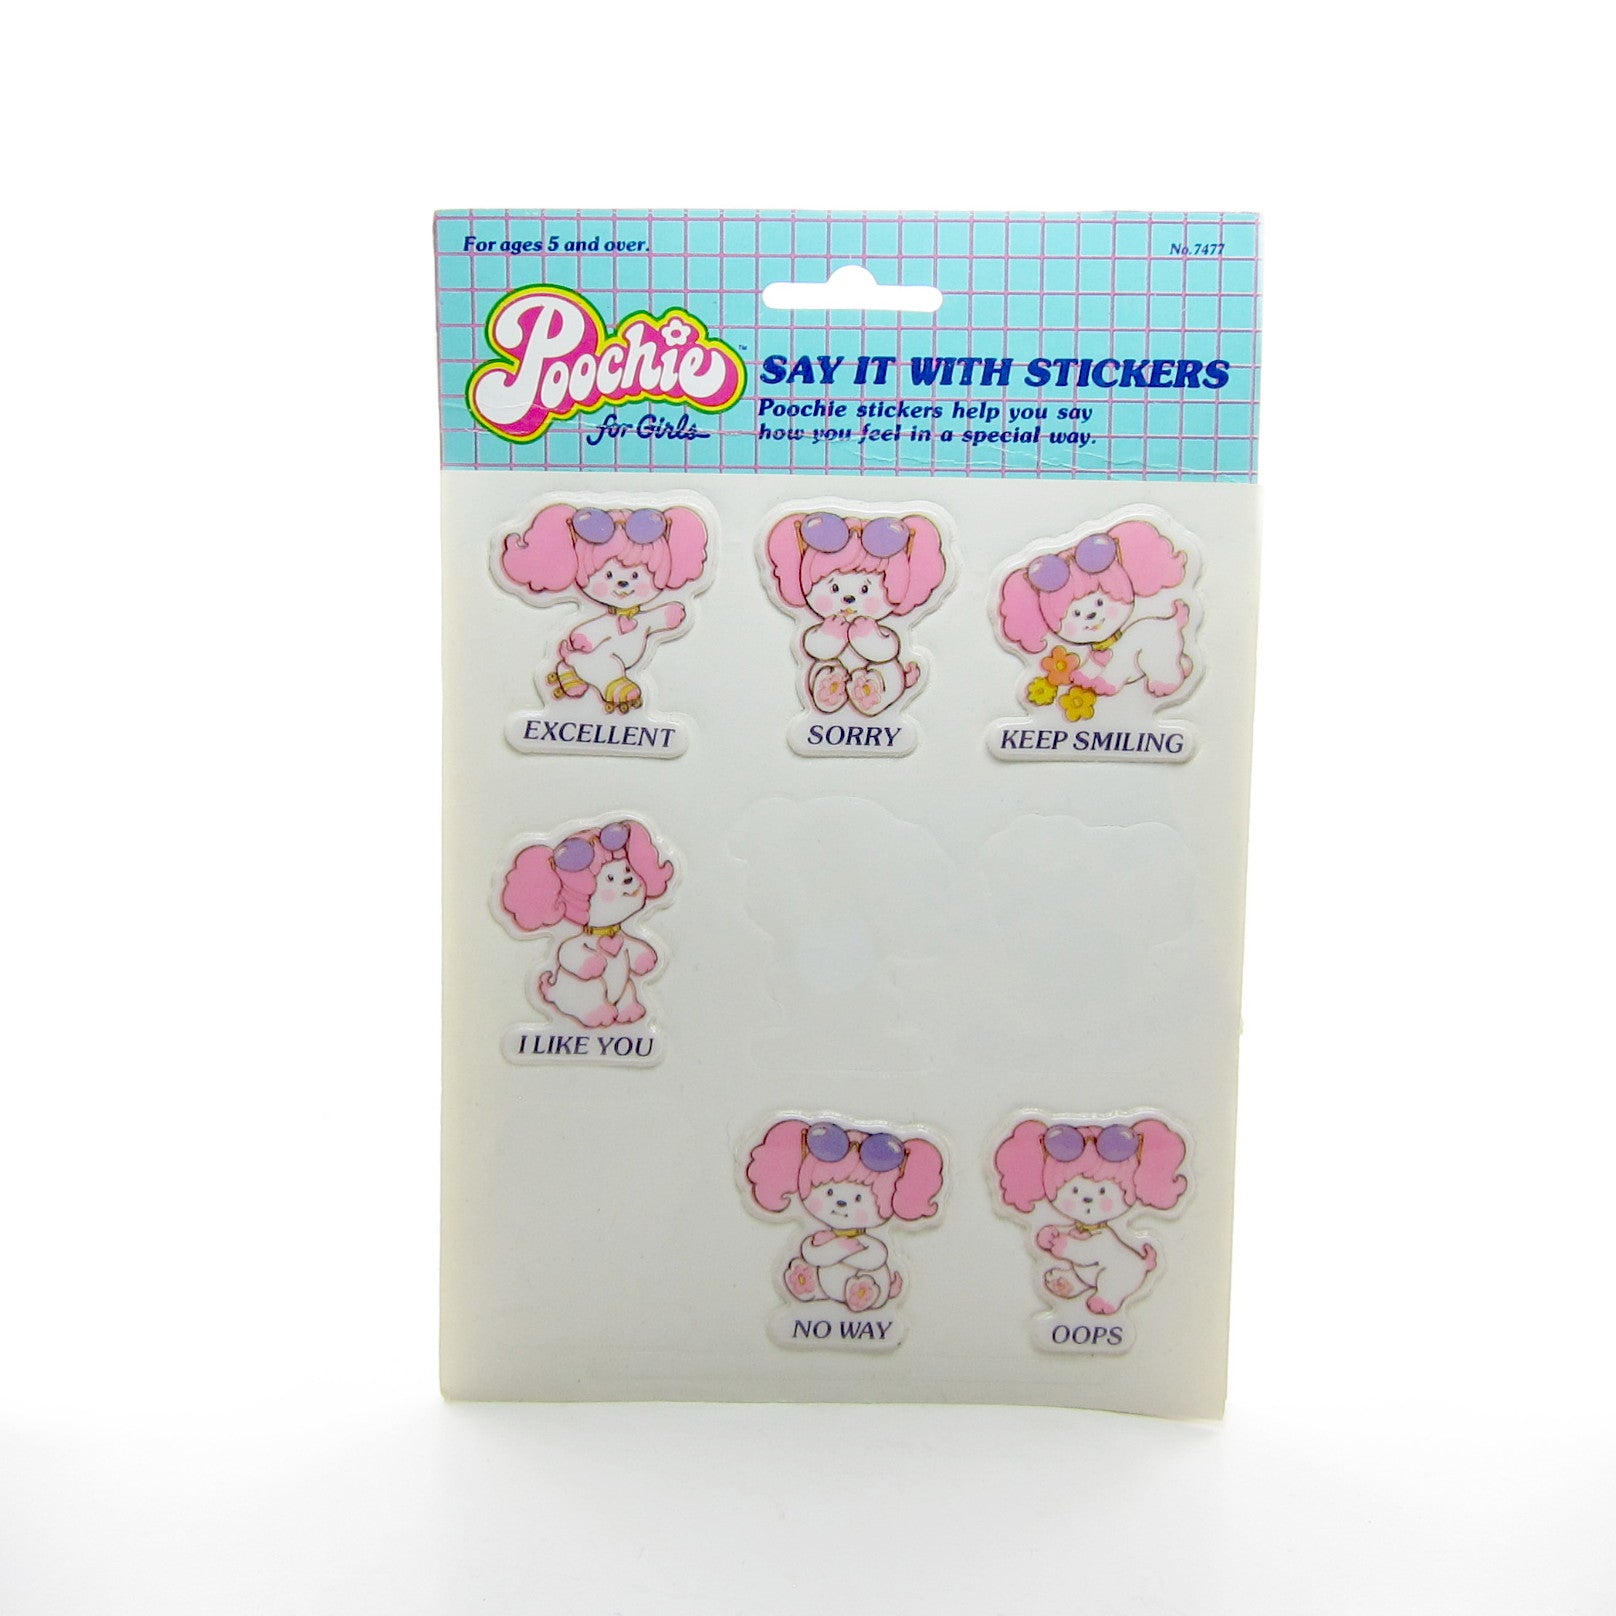 Poochie Say It With Stickers puffy sticker sheet